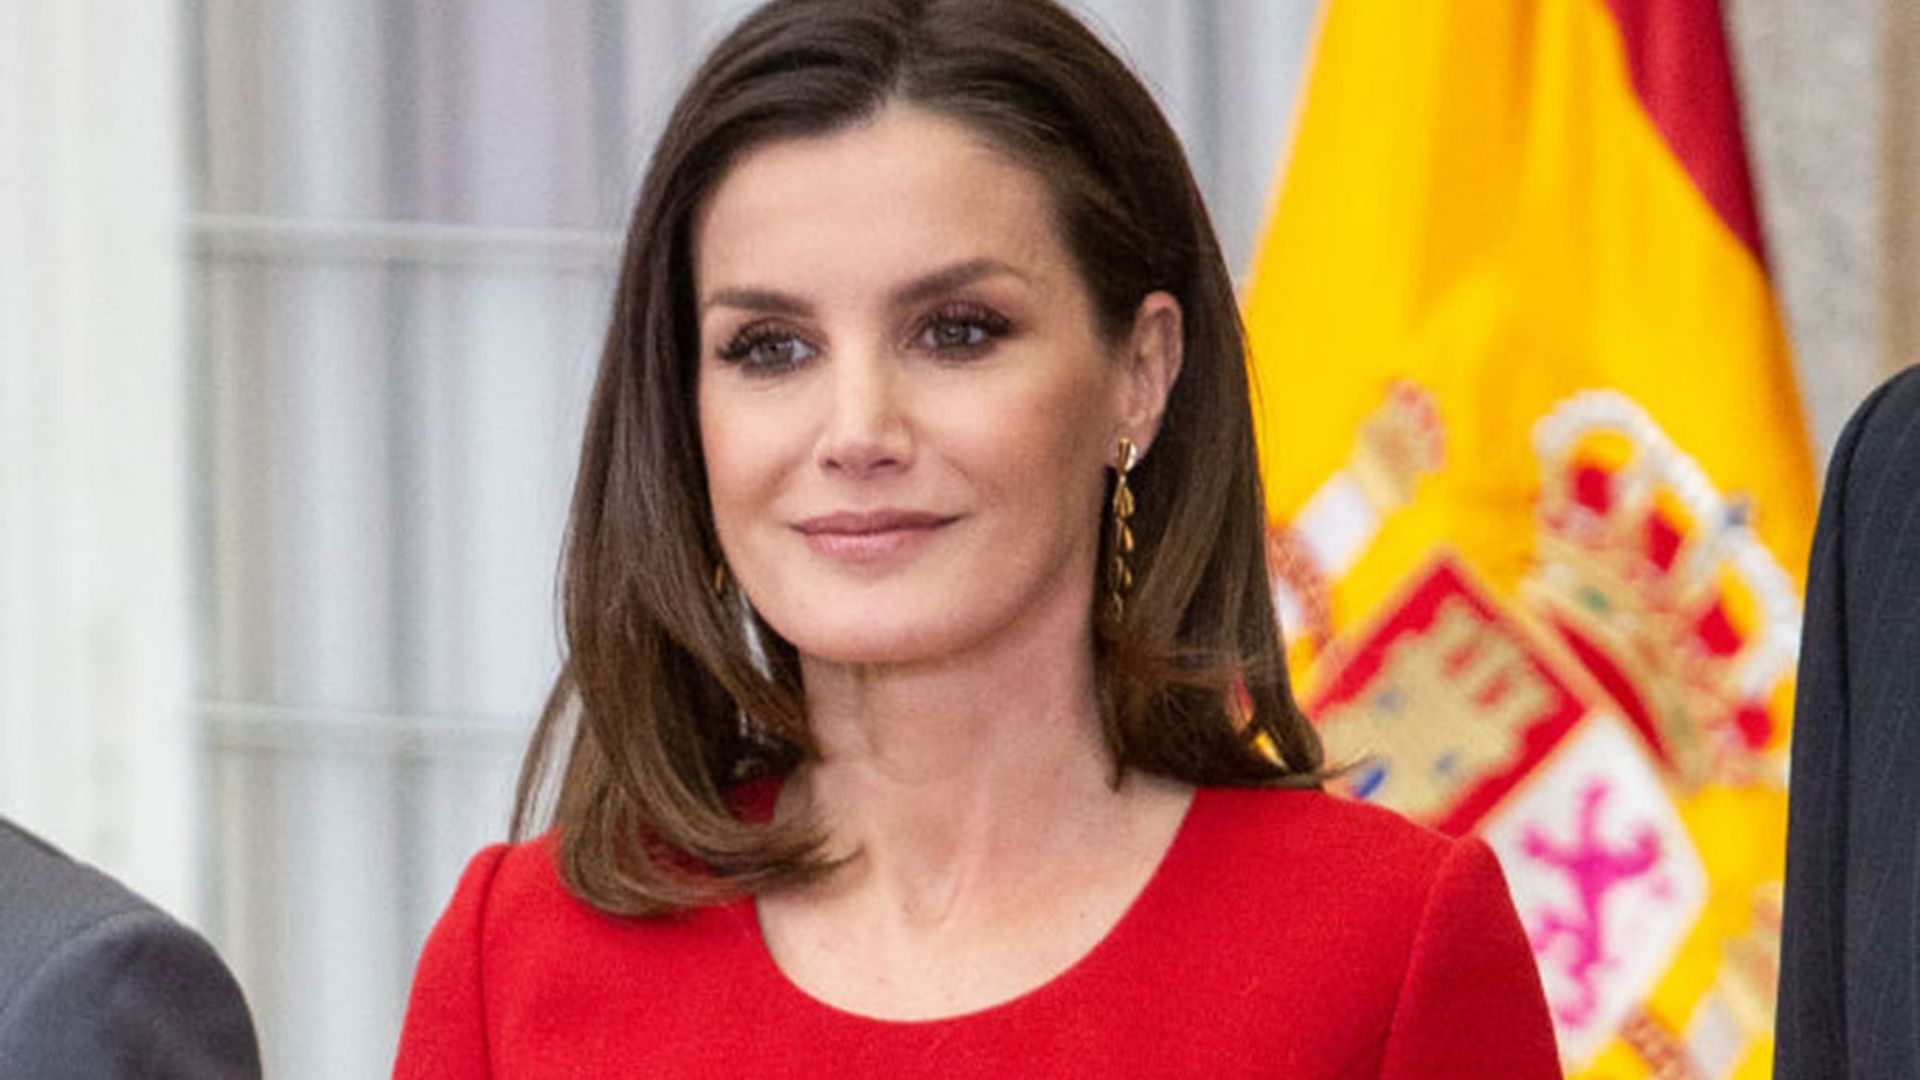 Queen Letizia wows royal fans in the most ravishing red dress